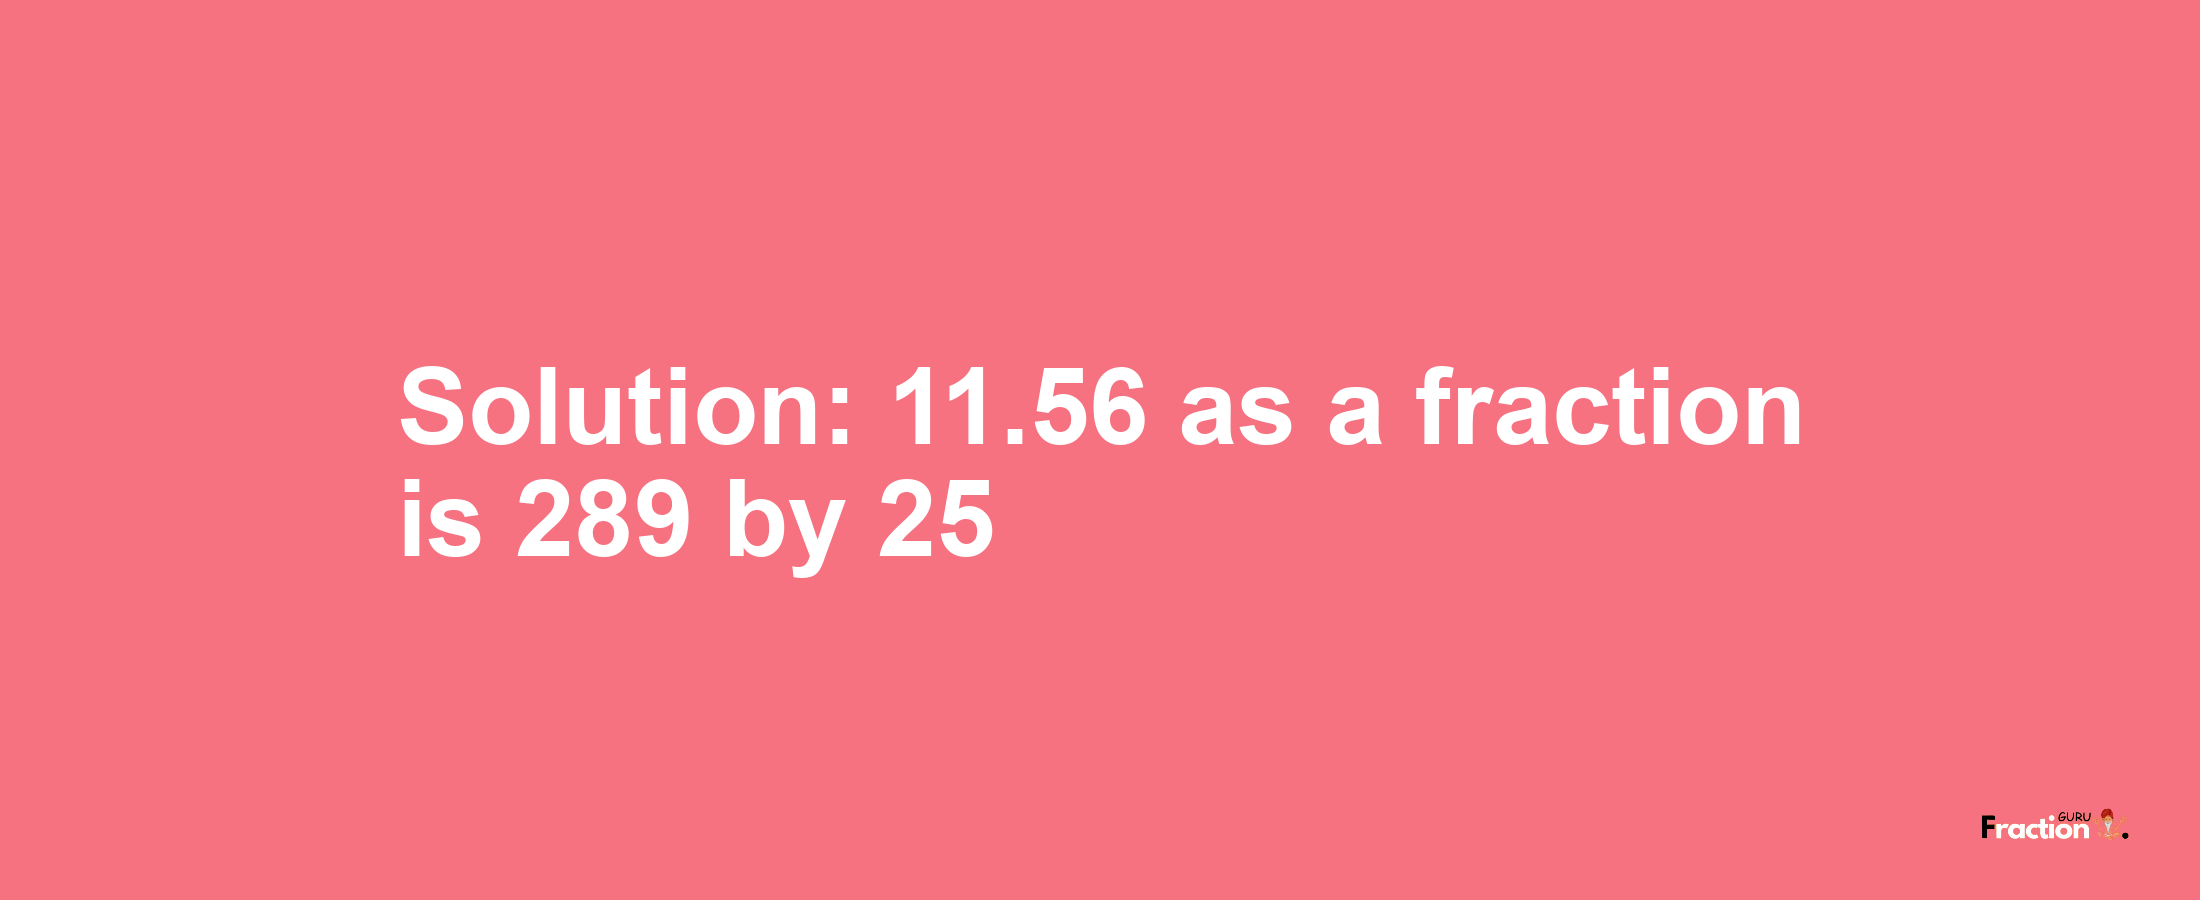 Solution:11.56 as a fraction is 289/25